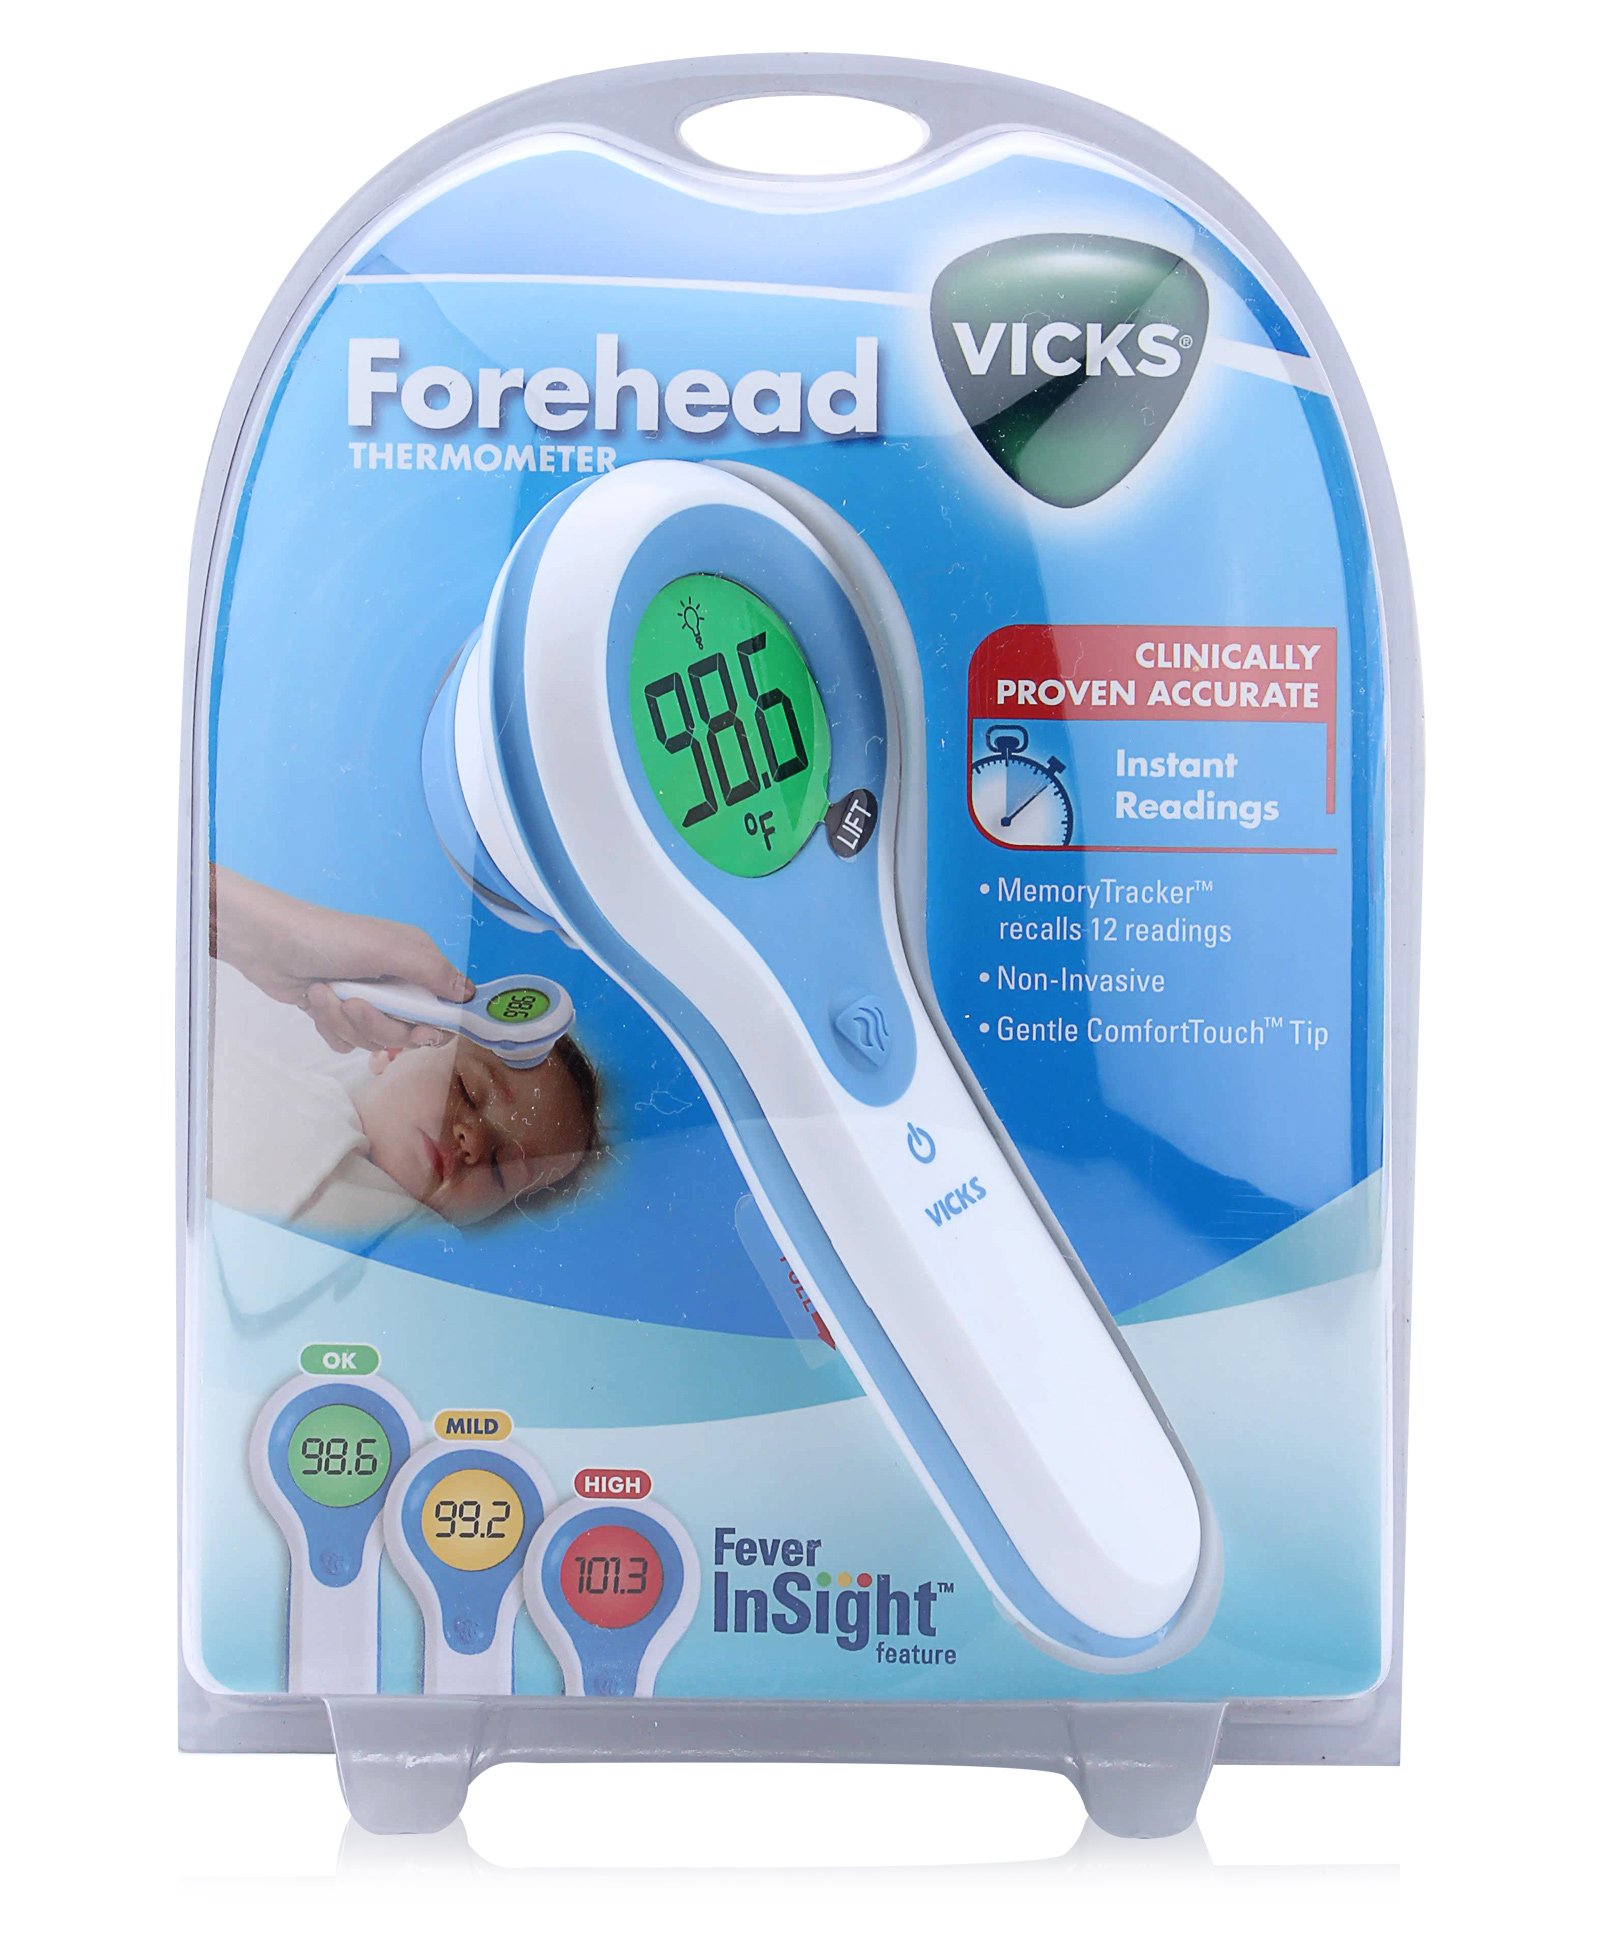 Vicks - Forehead Thermometer